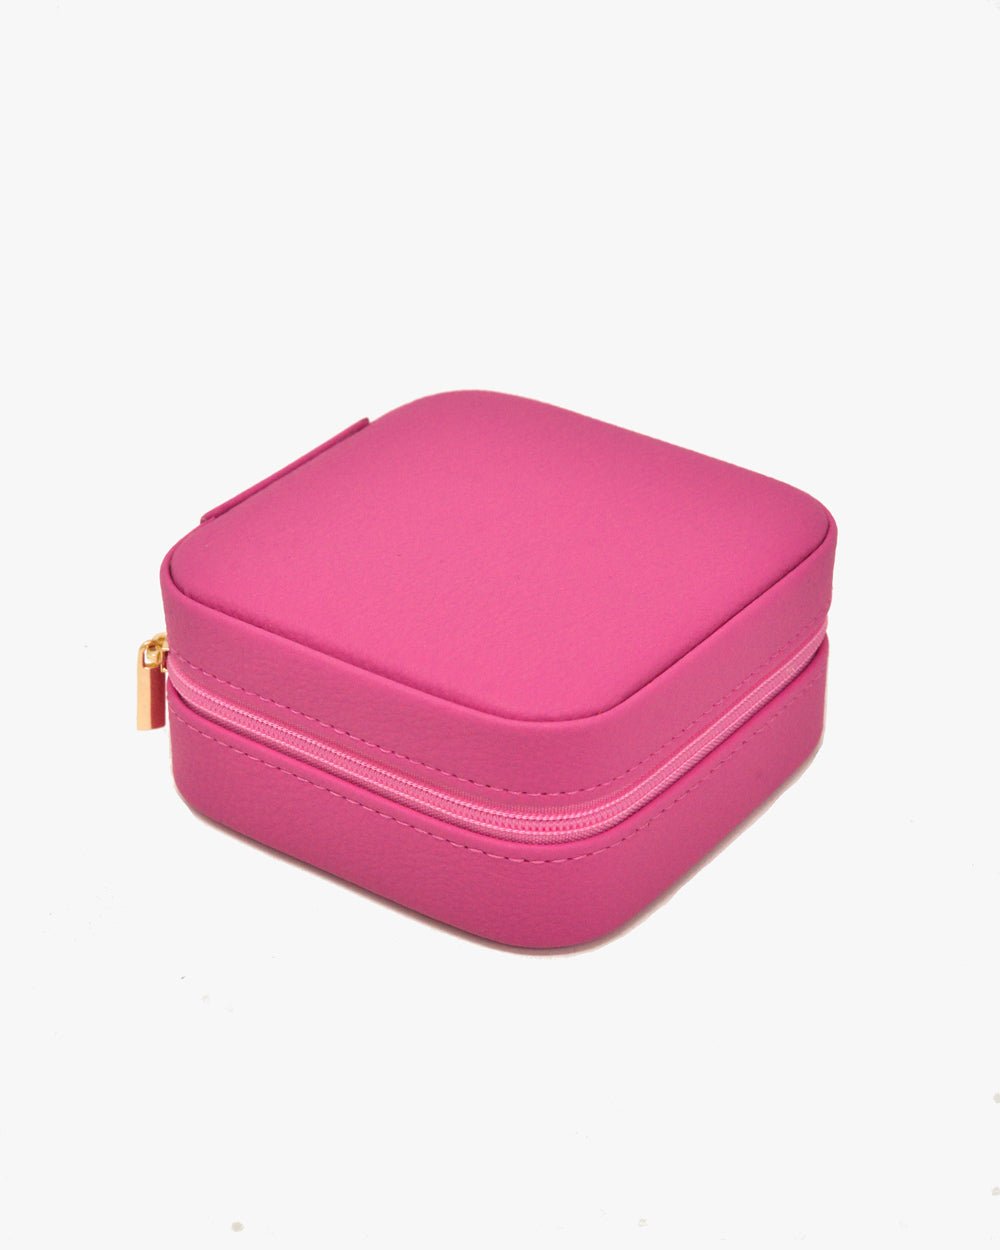 CUPCAKES AND CASHMERE JEWELRY CASE - Shop Cupcakes and Cashmere